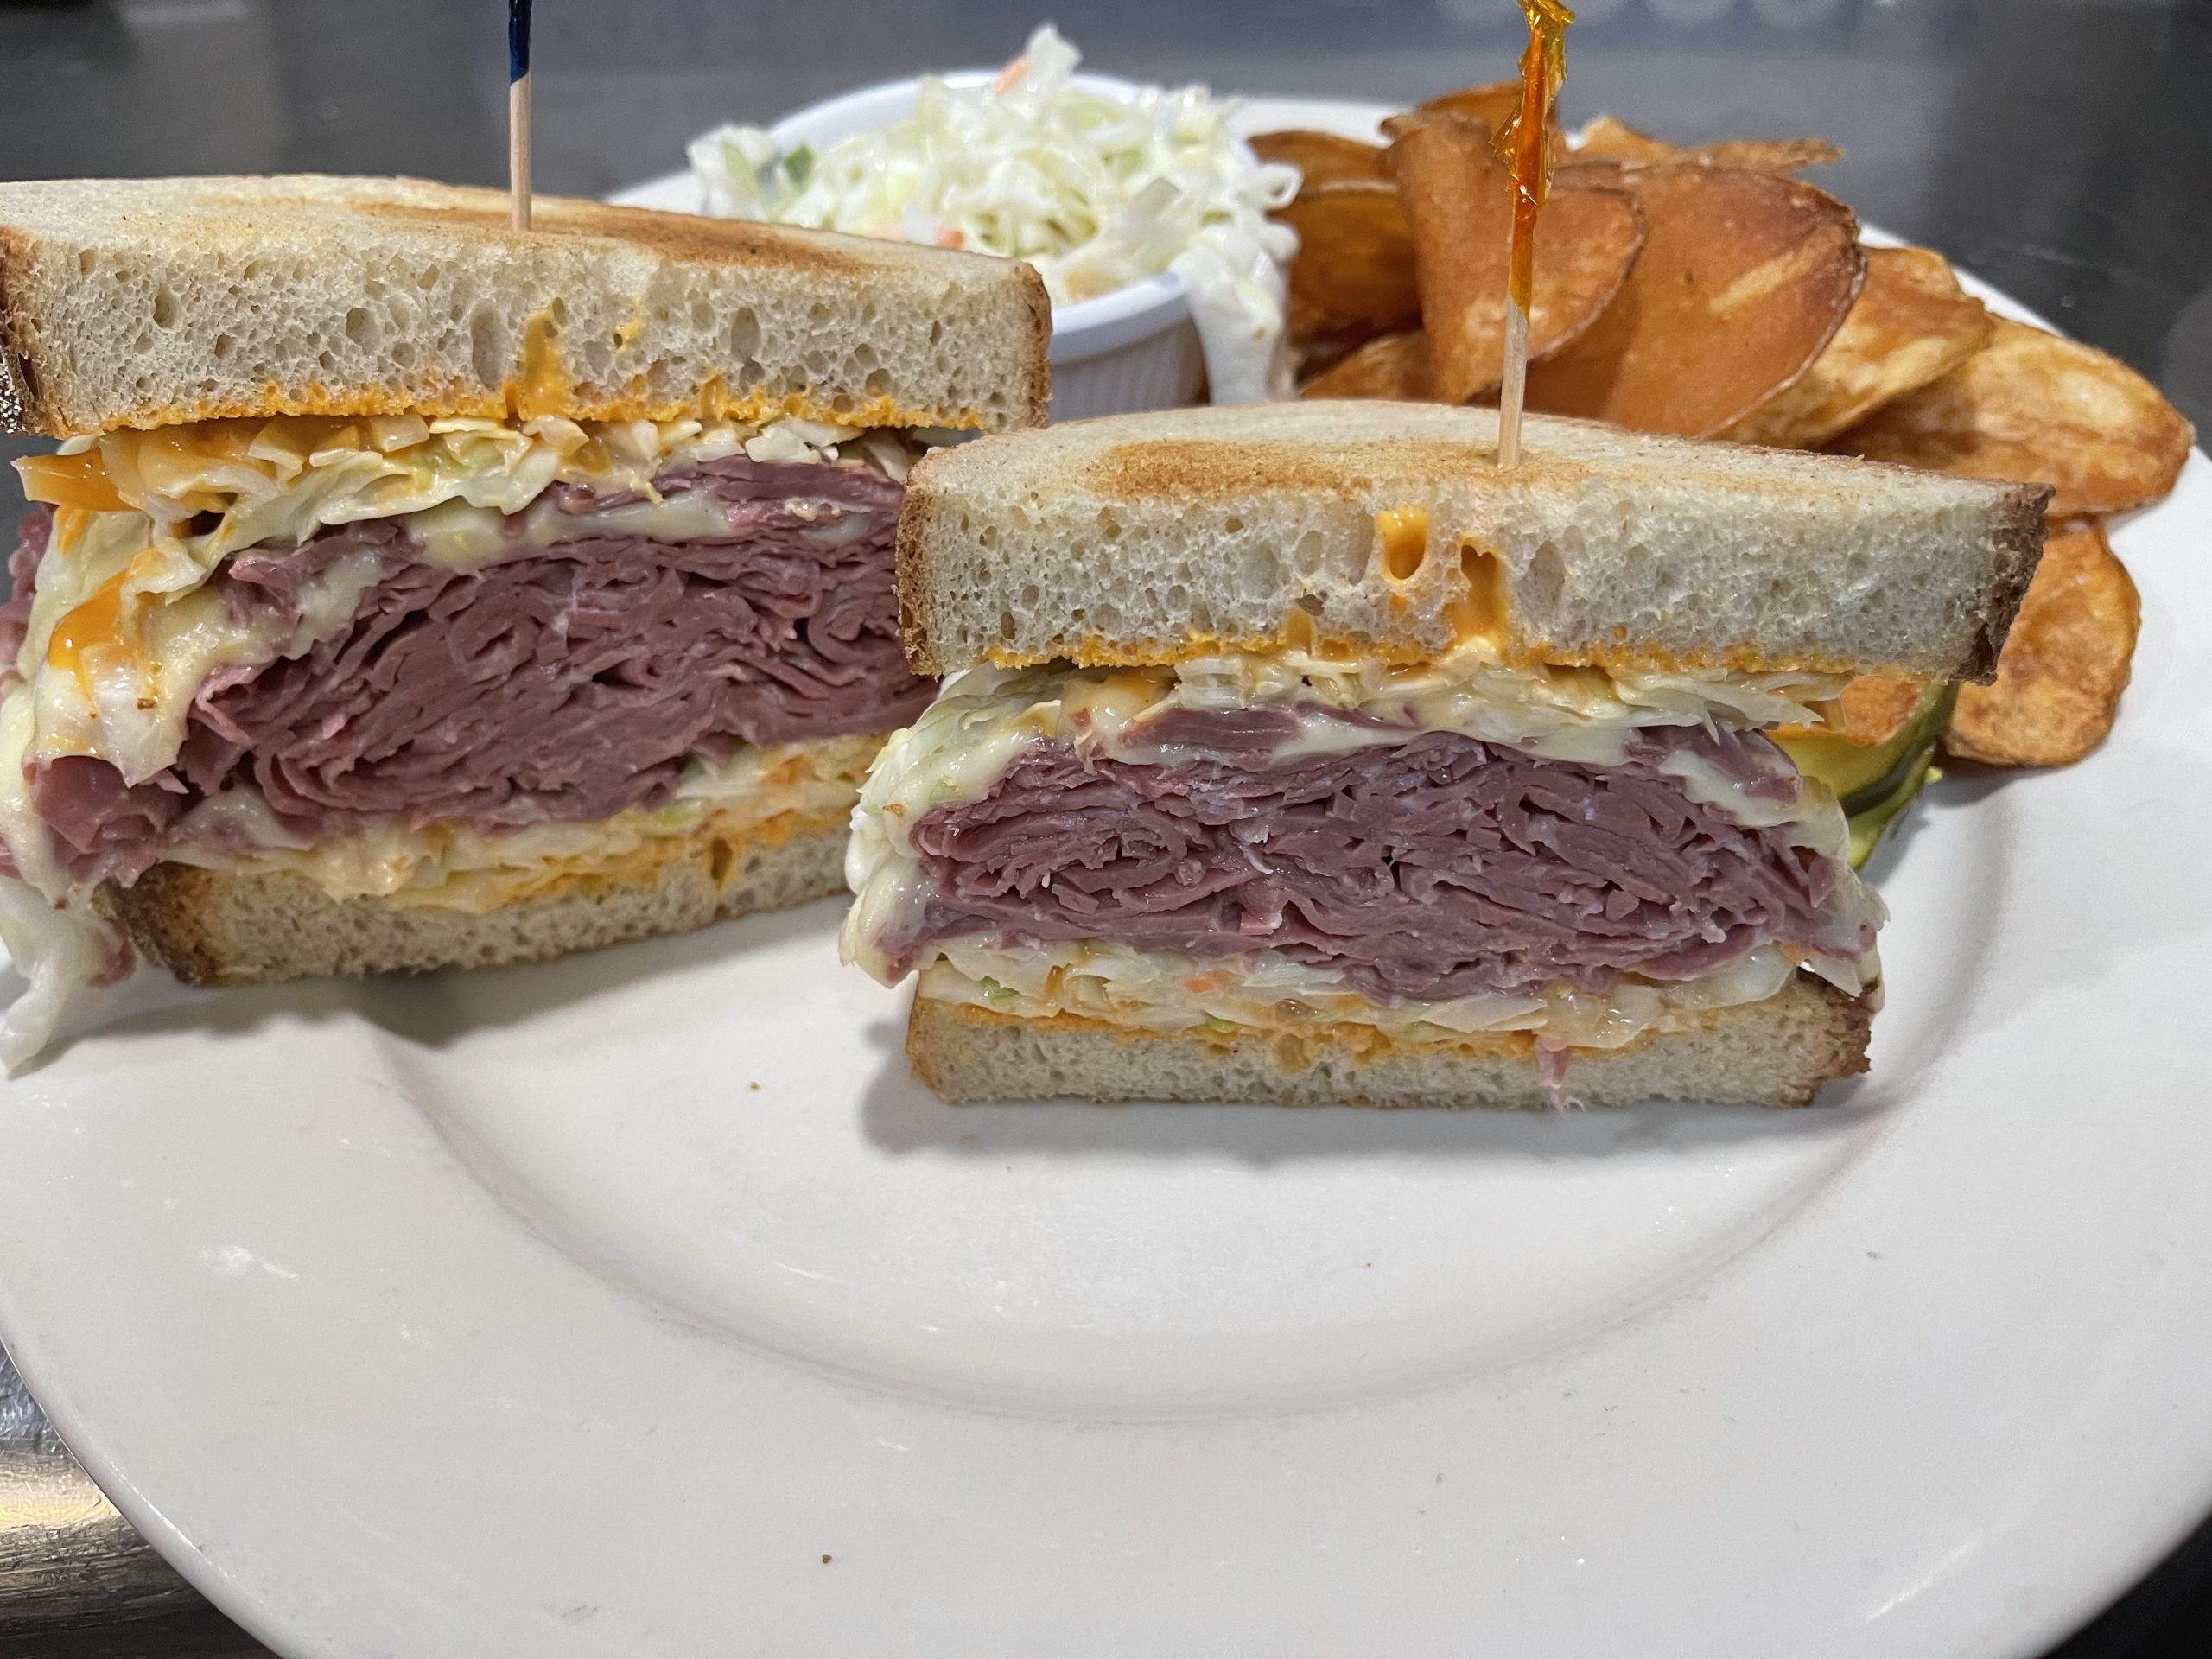 A sandwich with corned beef and coleslaw on a plate.